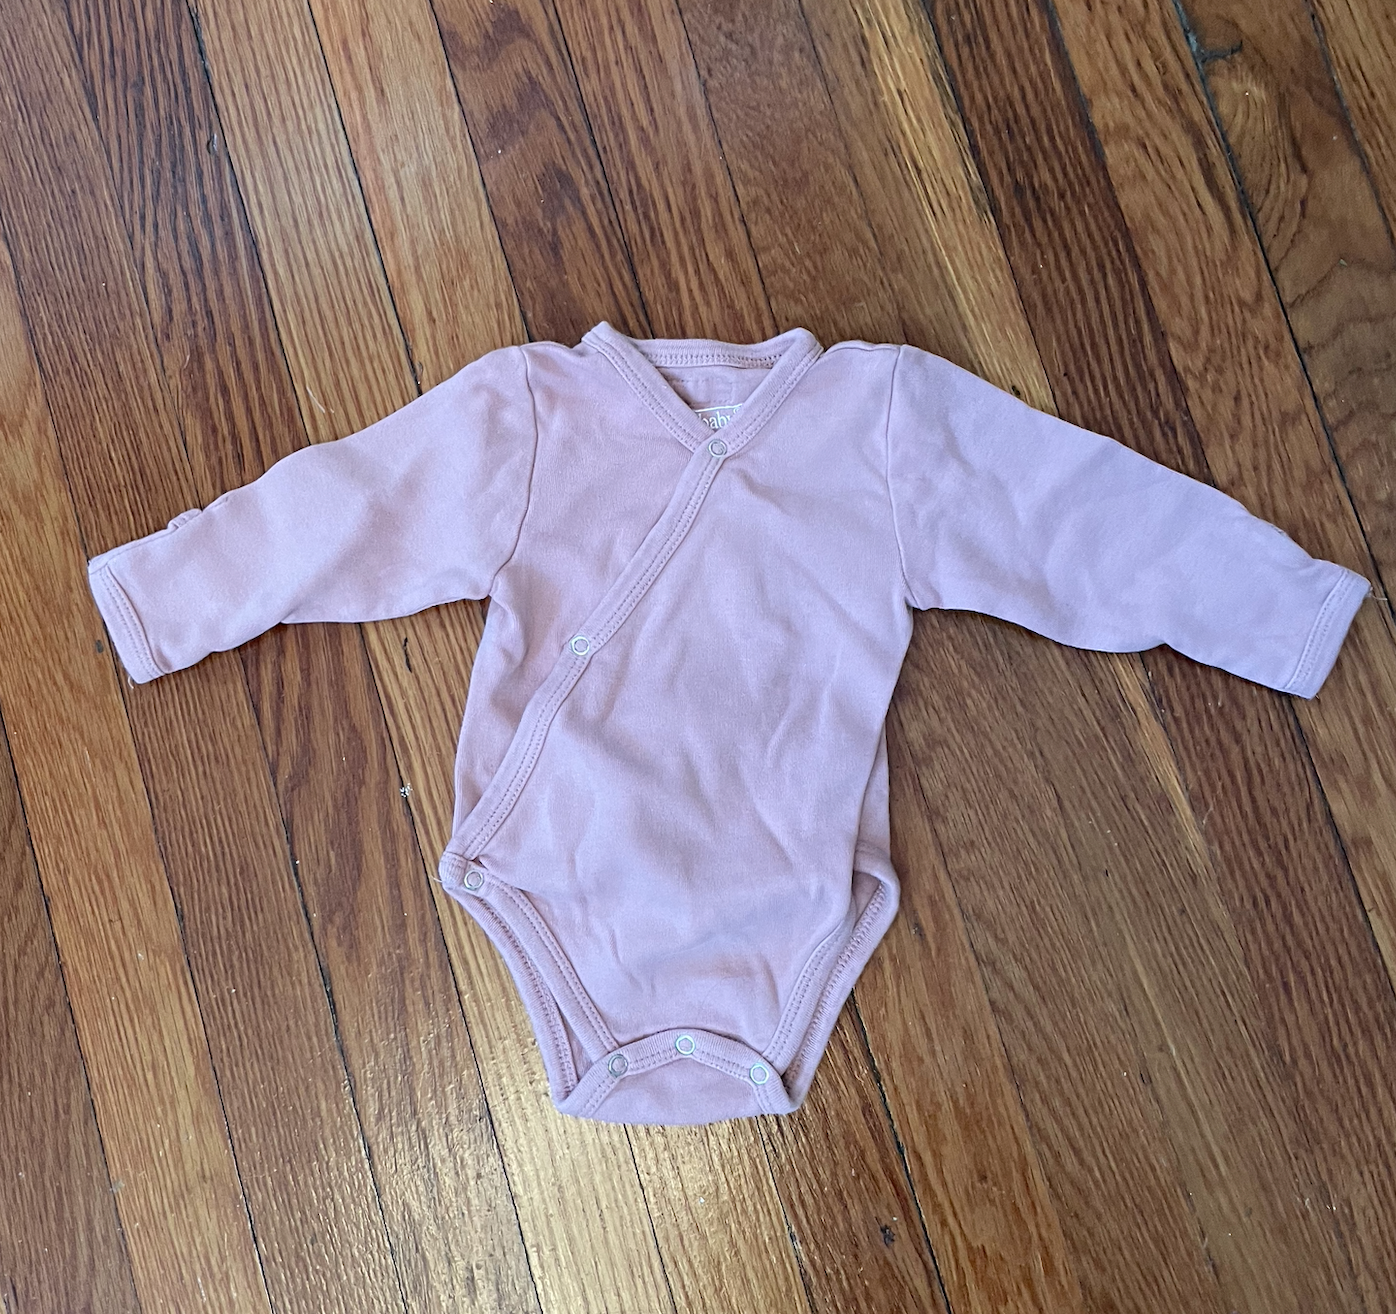 L'oved baby long sleeve onesie cross body snap - pink - girls size 3-6 months